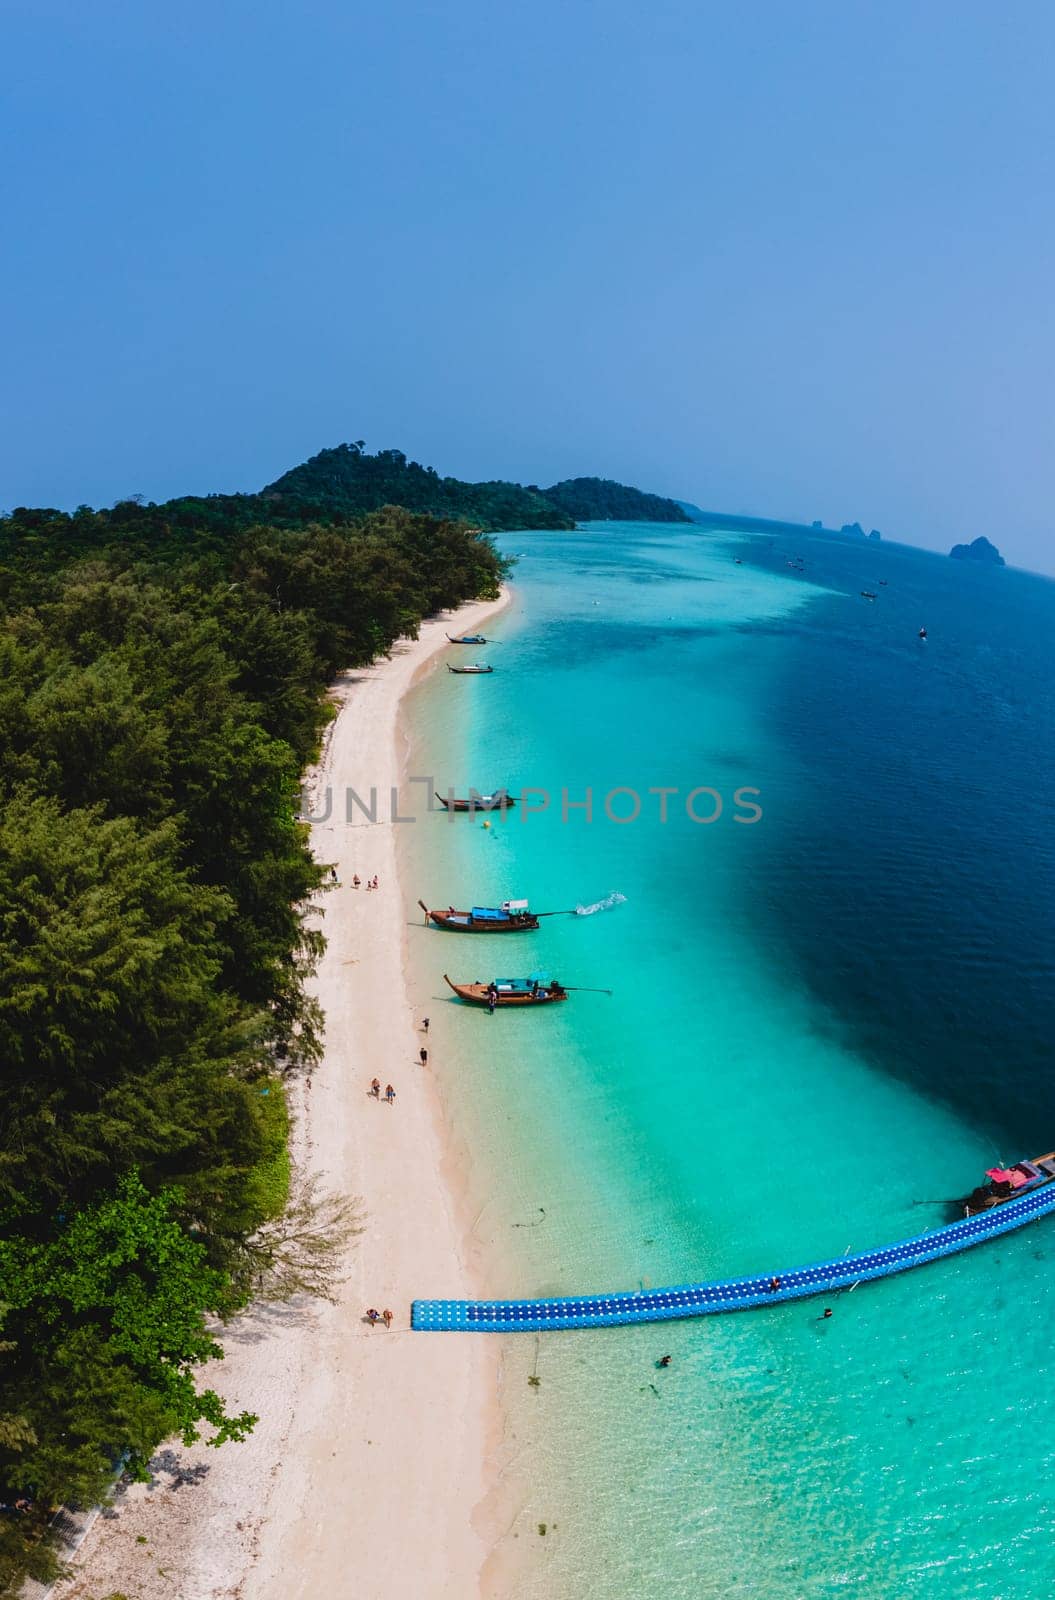 Koh Kradan Island with a white tropical beach and turqouse colored ocean in Thailand